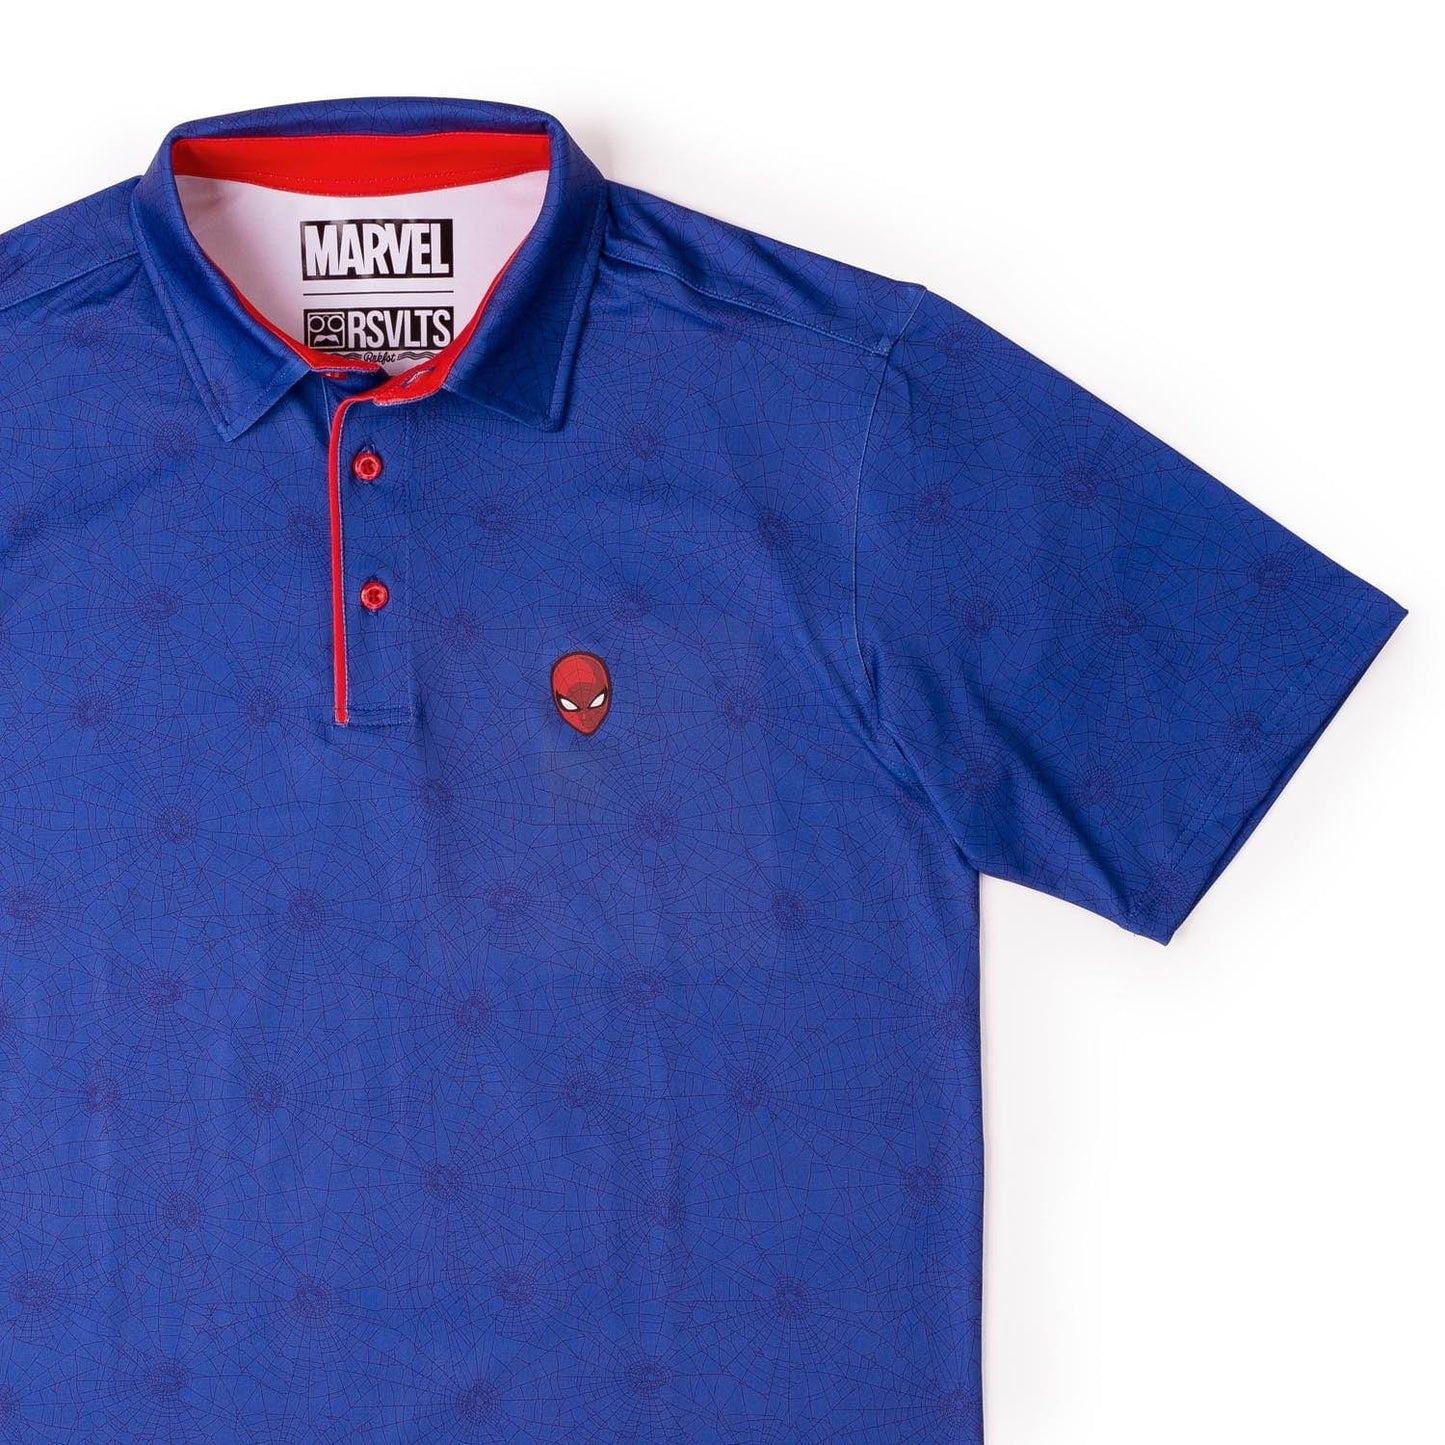 Spider-Man "Spidey" (Marvel) All-Day Polo Shirt by RSVLTS